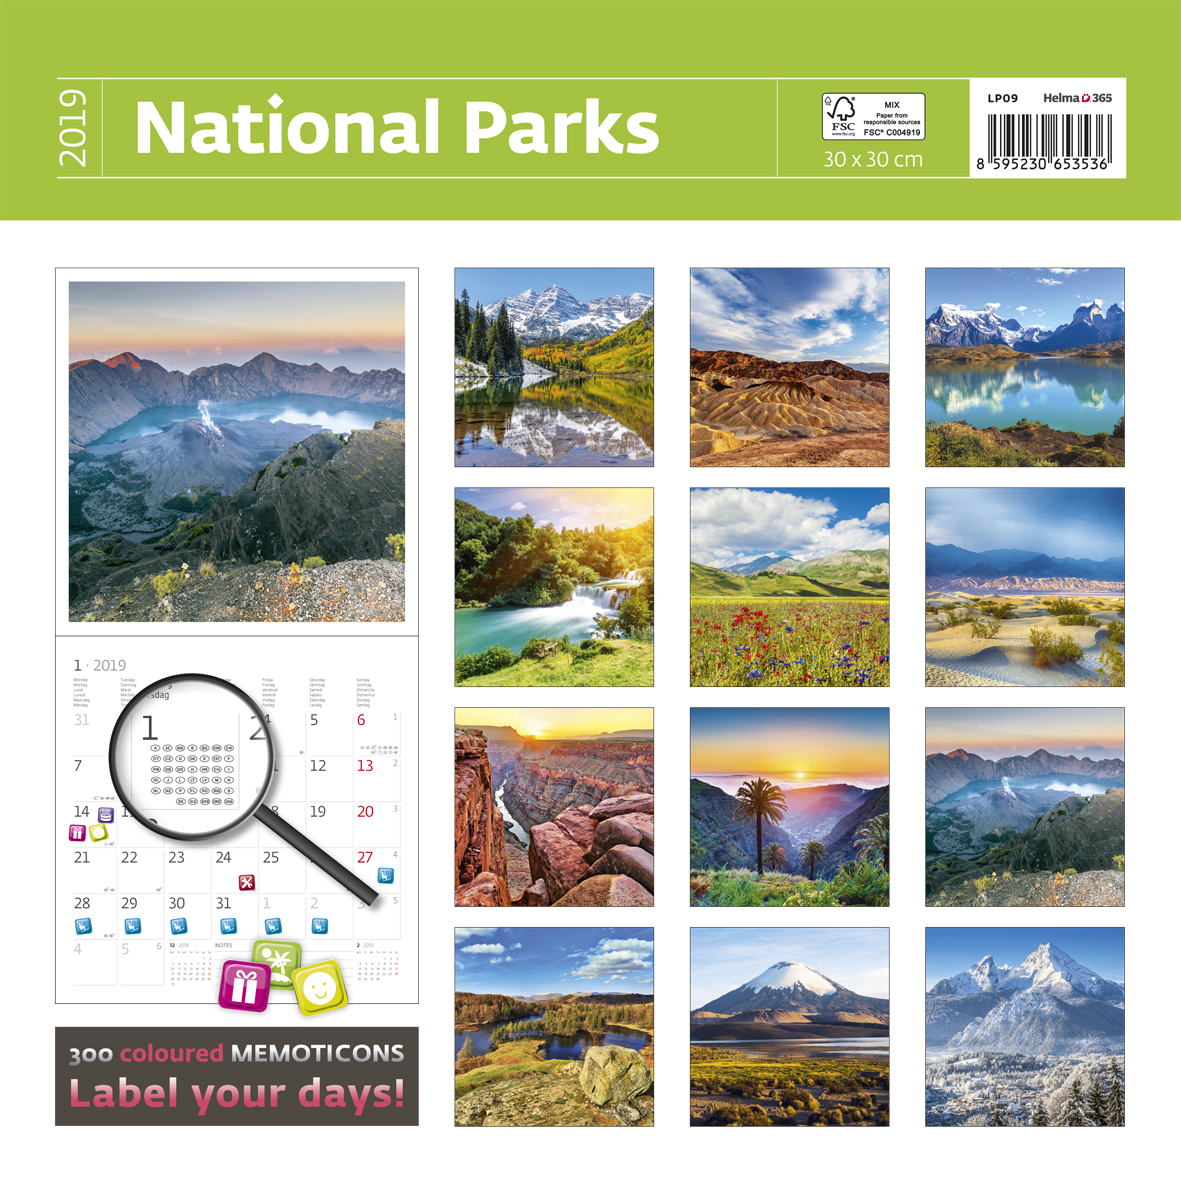 National Parks Wall Calendar 2019 by Helma Travel, Places, Scenery